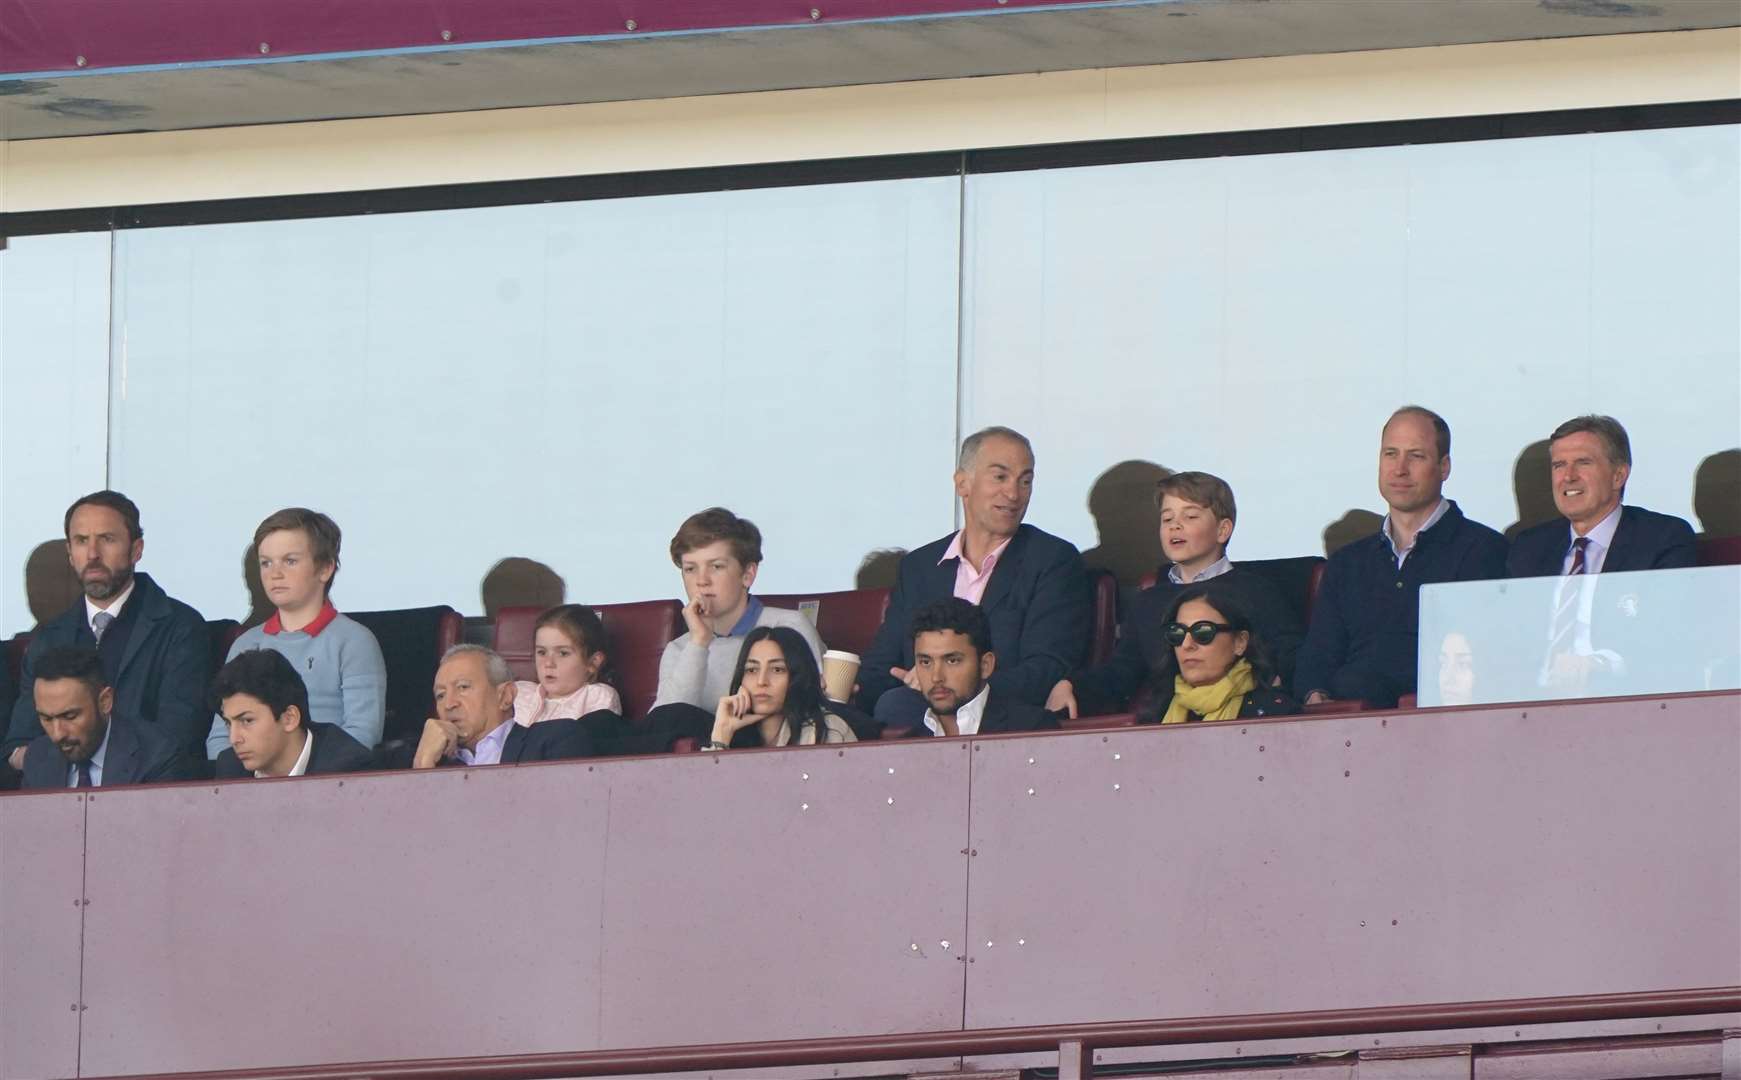 The Prince of Wales with Prince George, Aston Villa chief executive Christian Purslow and England manager Gareth Southgate (far left) (Joe Giddens/PA)